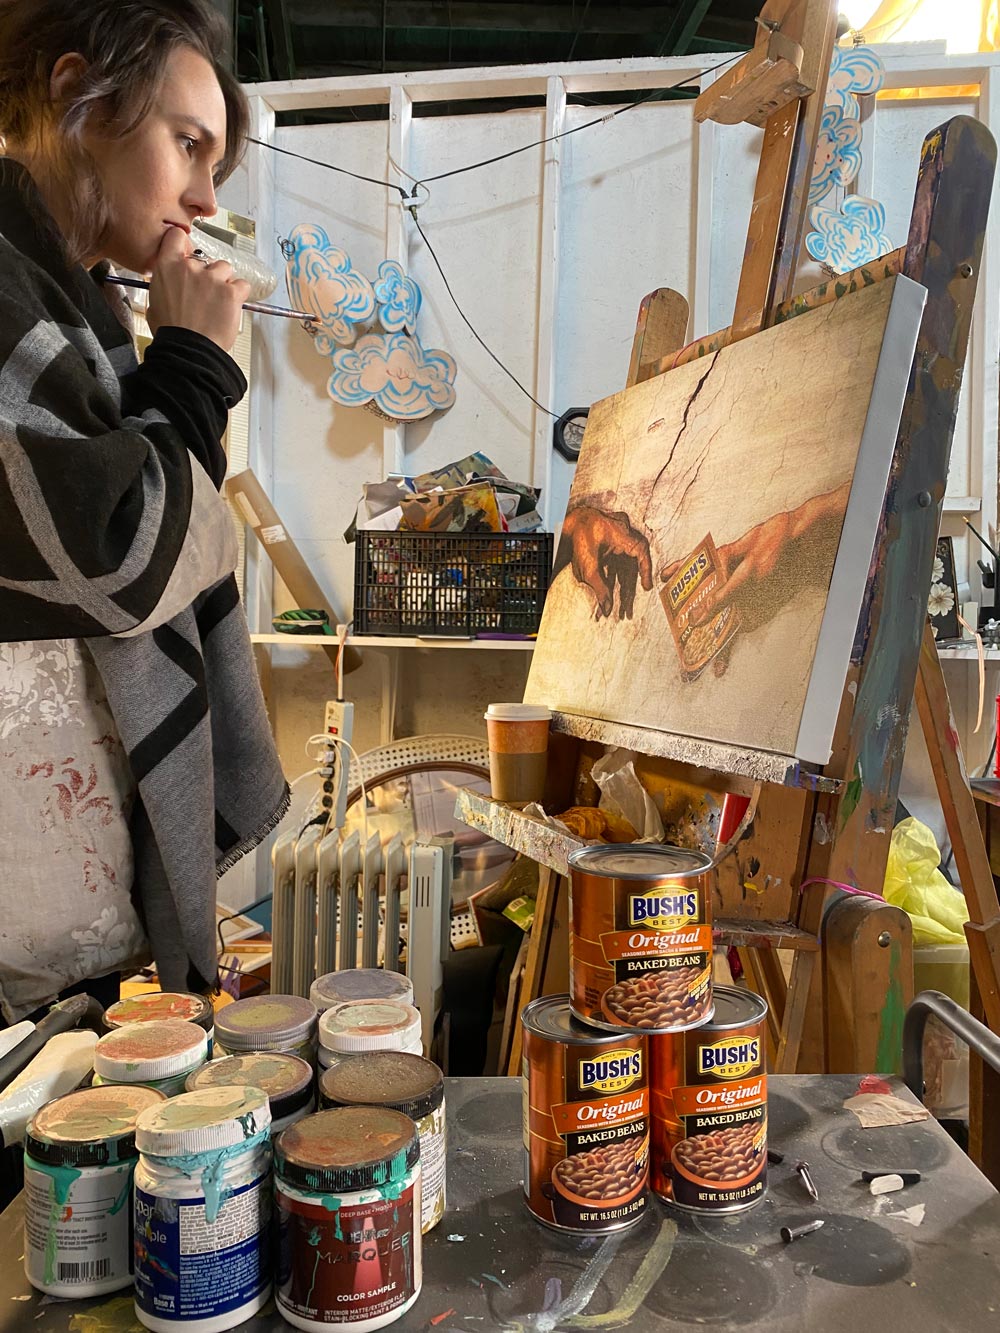 A woman holding a paint brush regards a painting on an easel, a parody of Michelangelo's 'The Creation of Adam,' in which God's hand is holding a can of Bush's baked beans